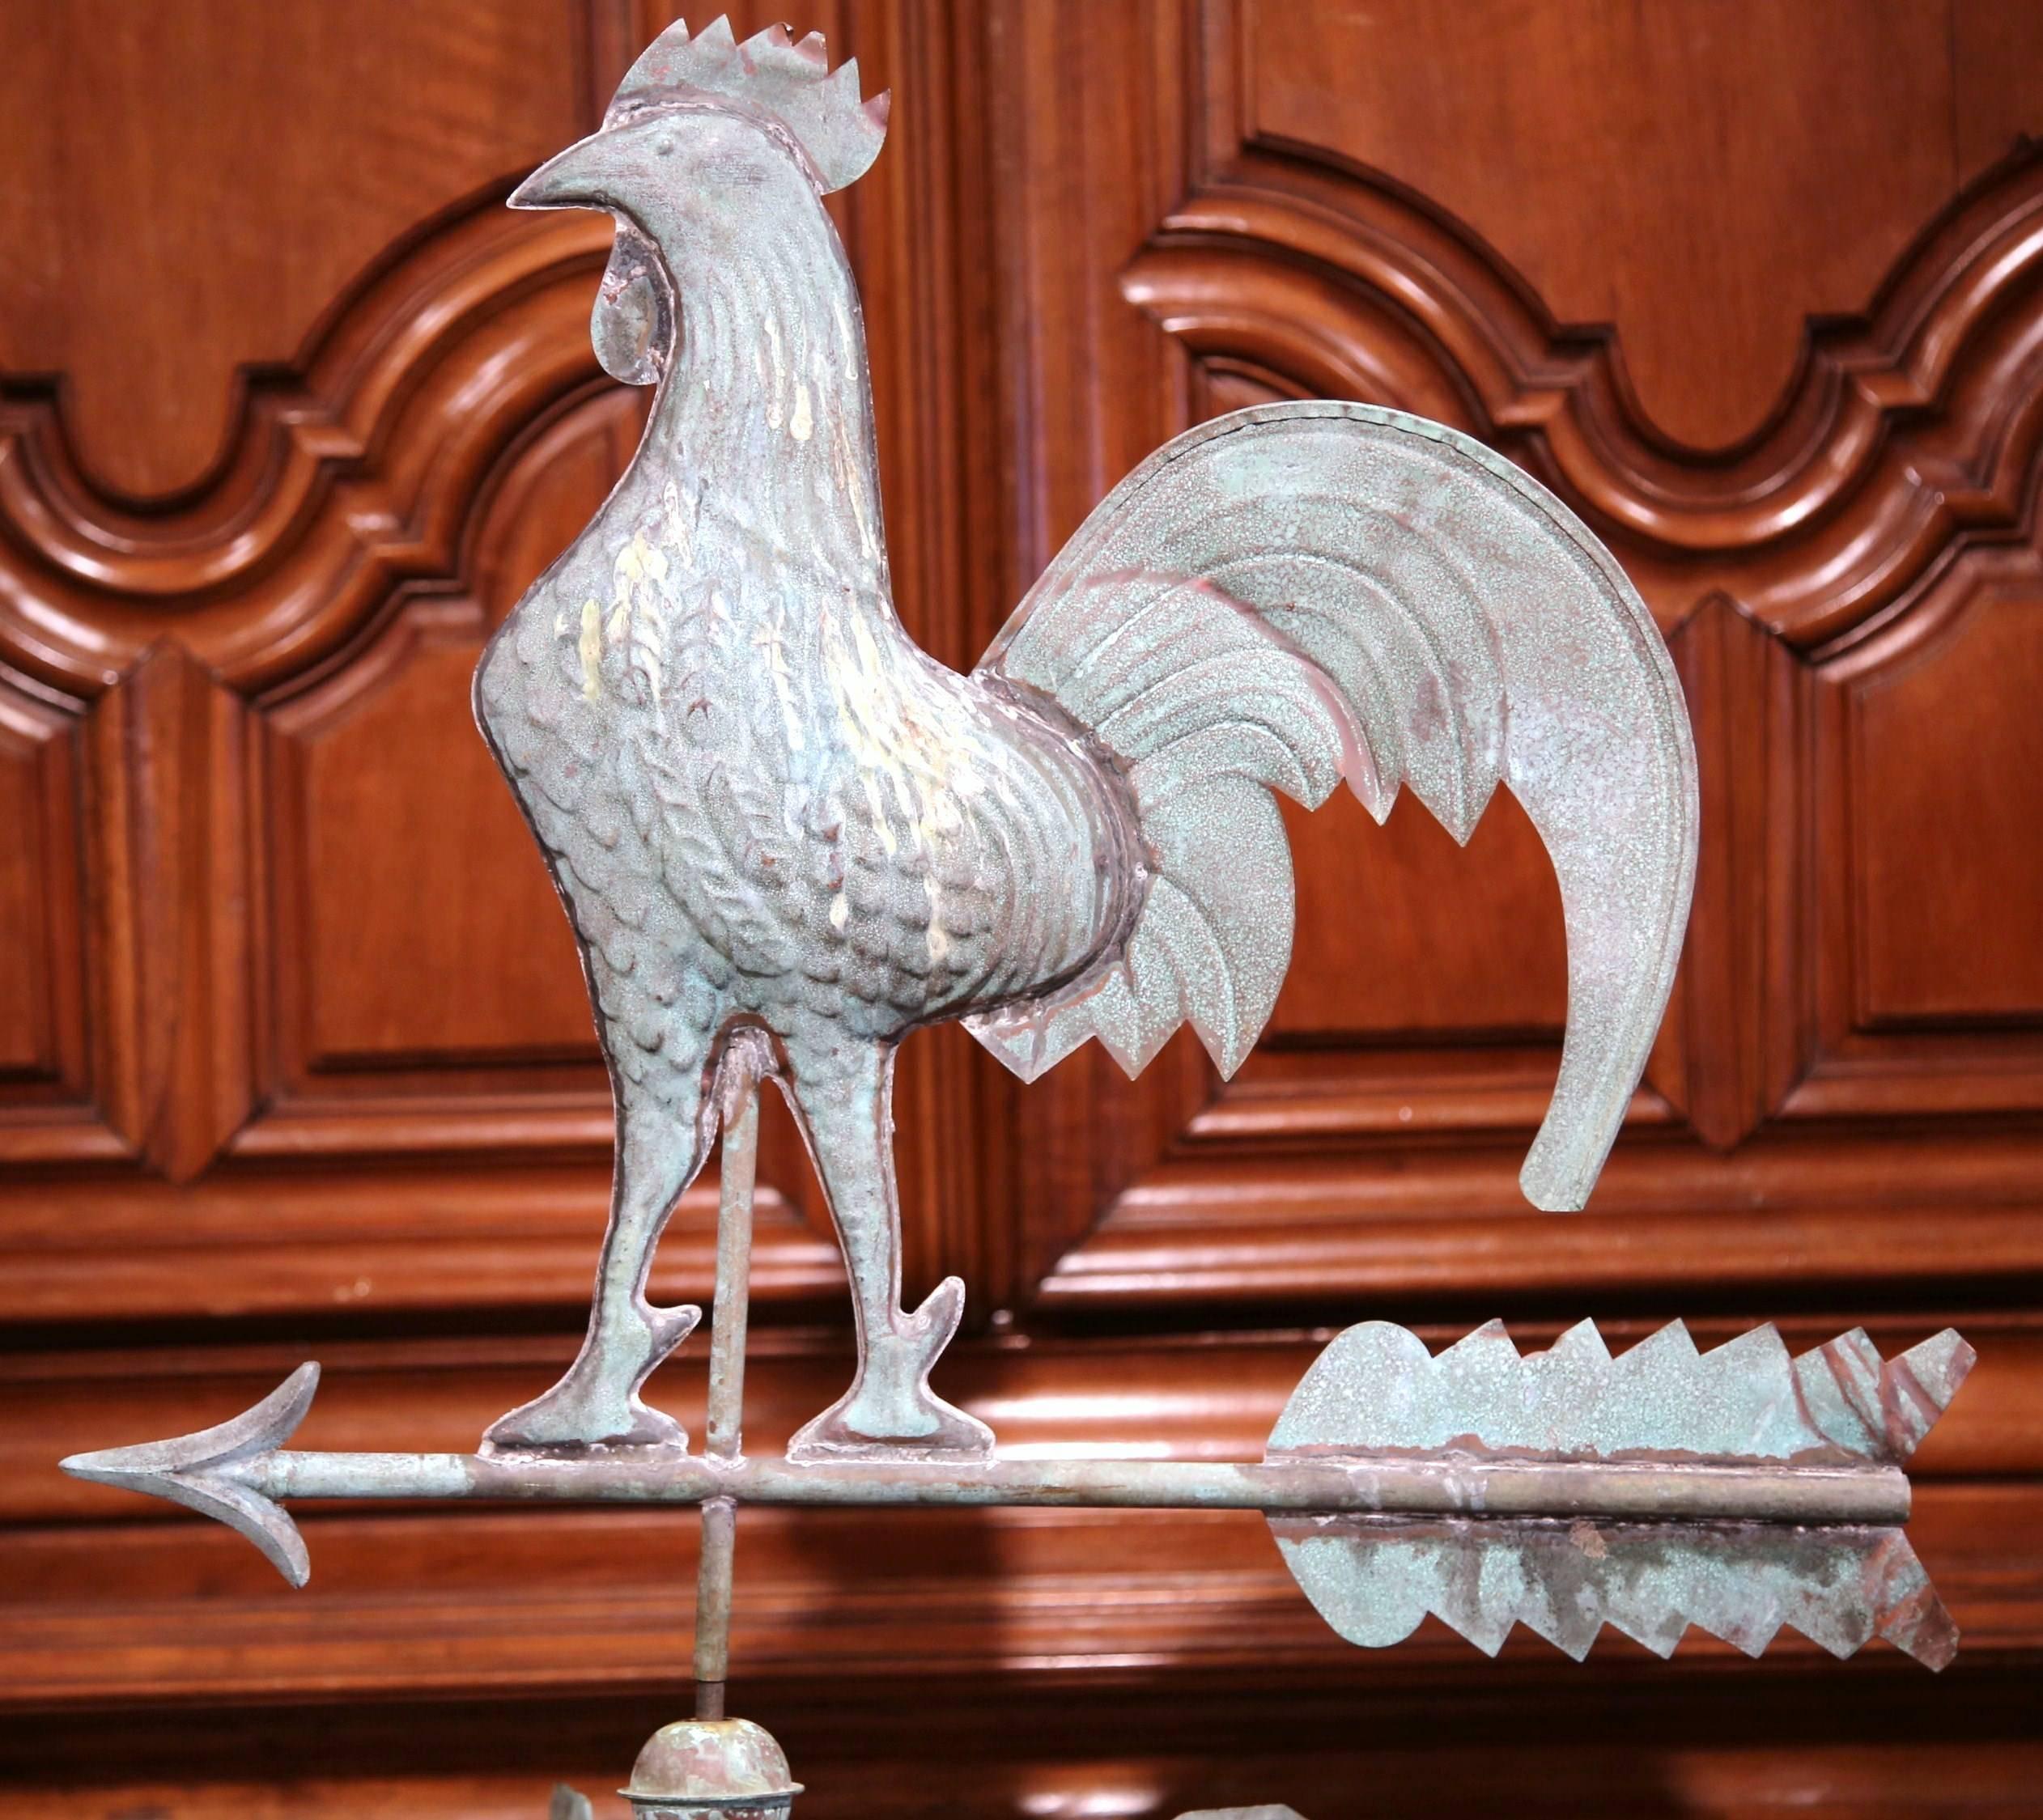 This beautifully crafted tole weather vane was created on the Normandy coast of France, circa 1860. The traditional weather vane features a Classic swivel French rooster standing on an arrow; below, the four points of the compass which swivel